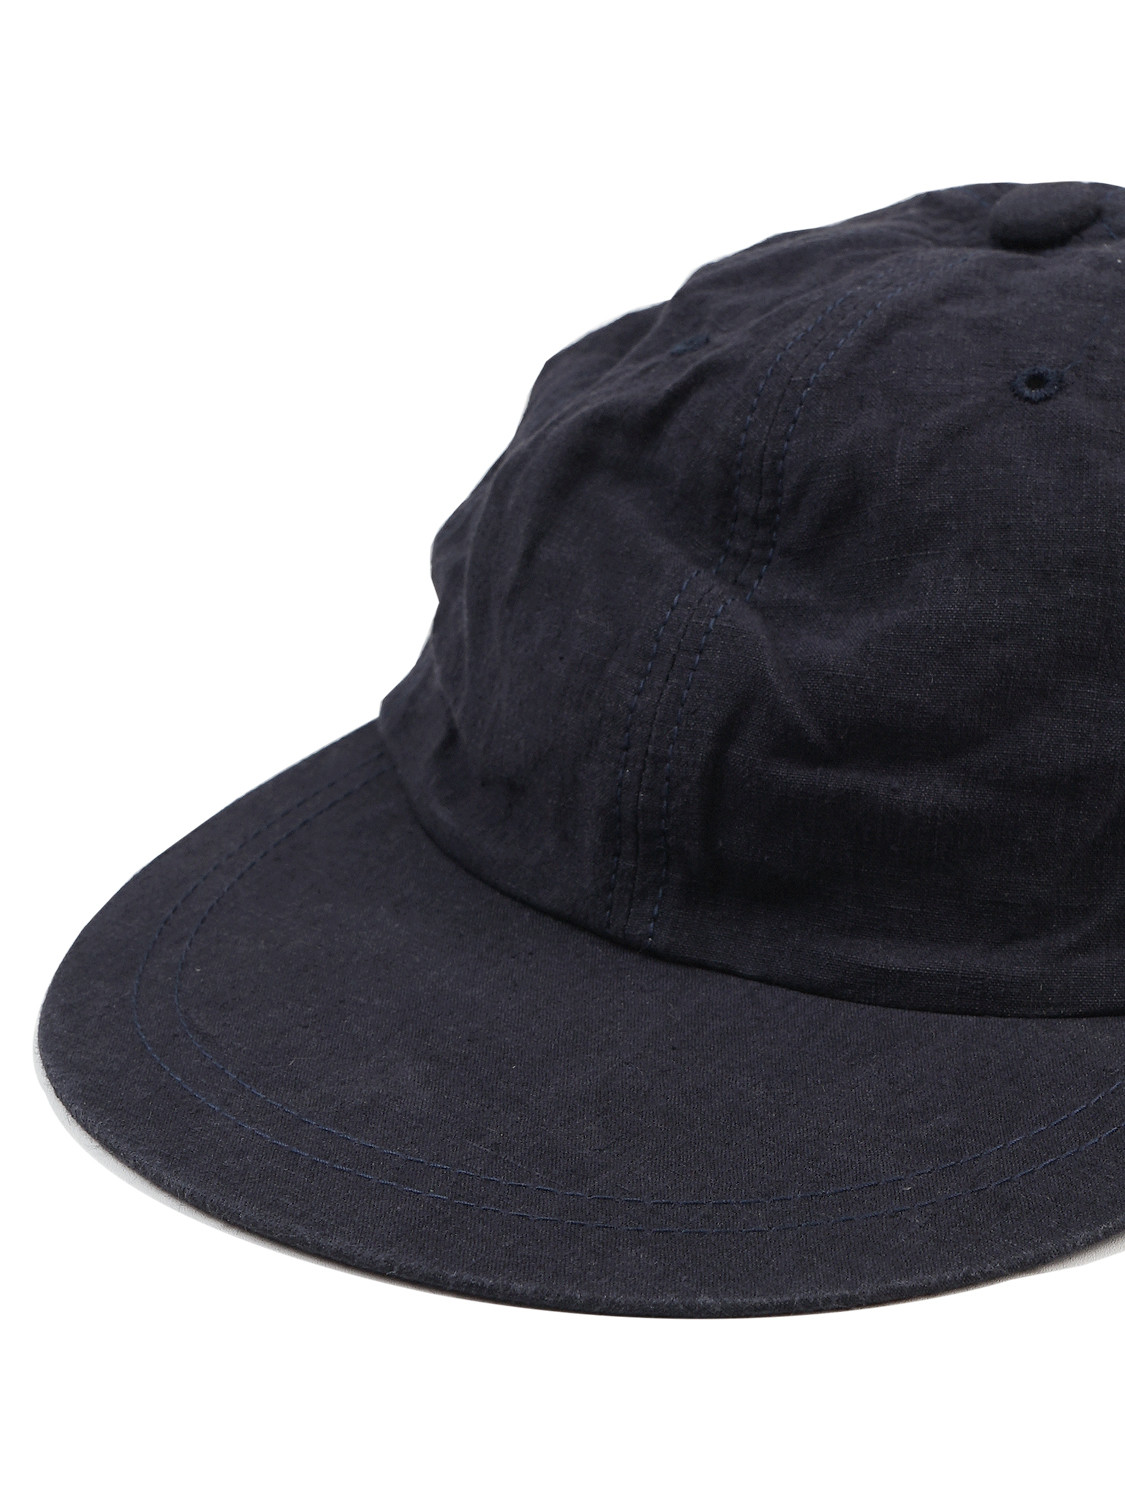 ENDS and MEANS 6panels cap (navy)